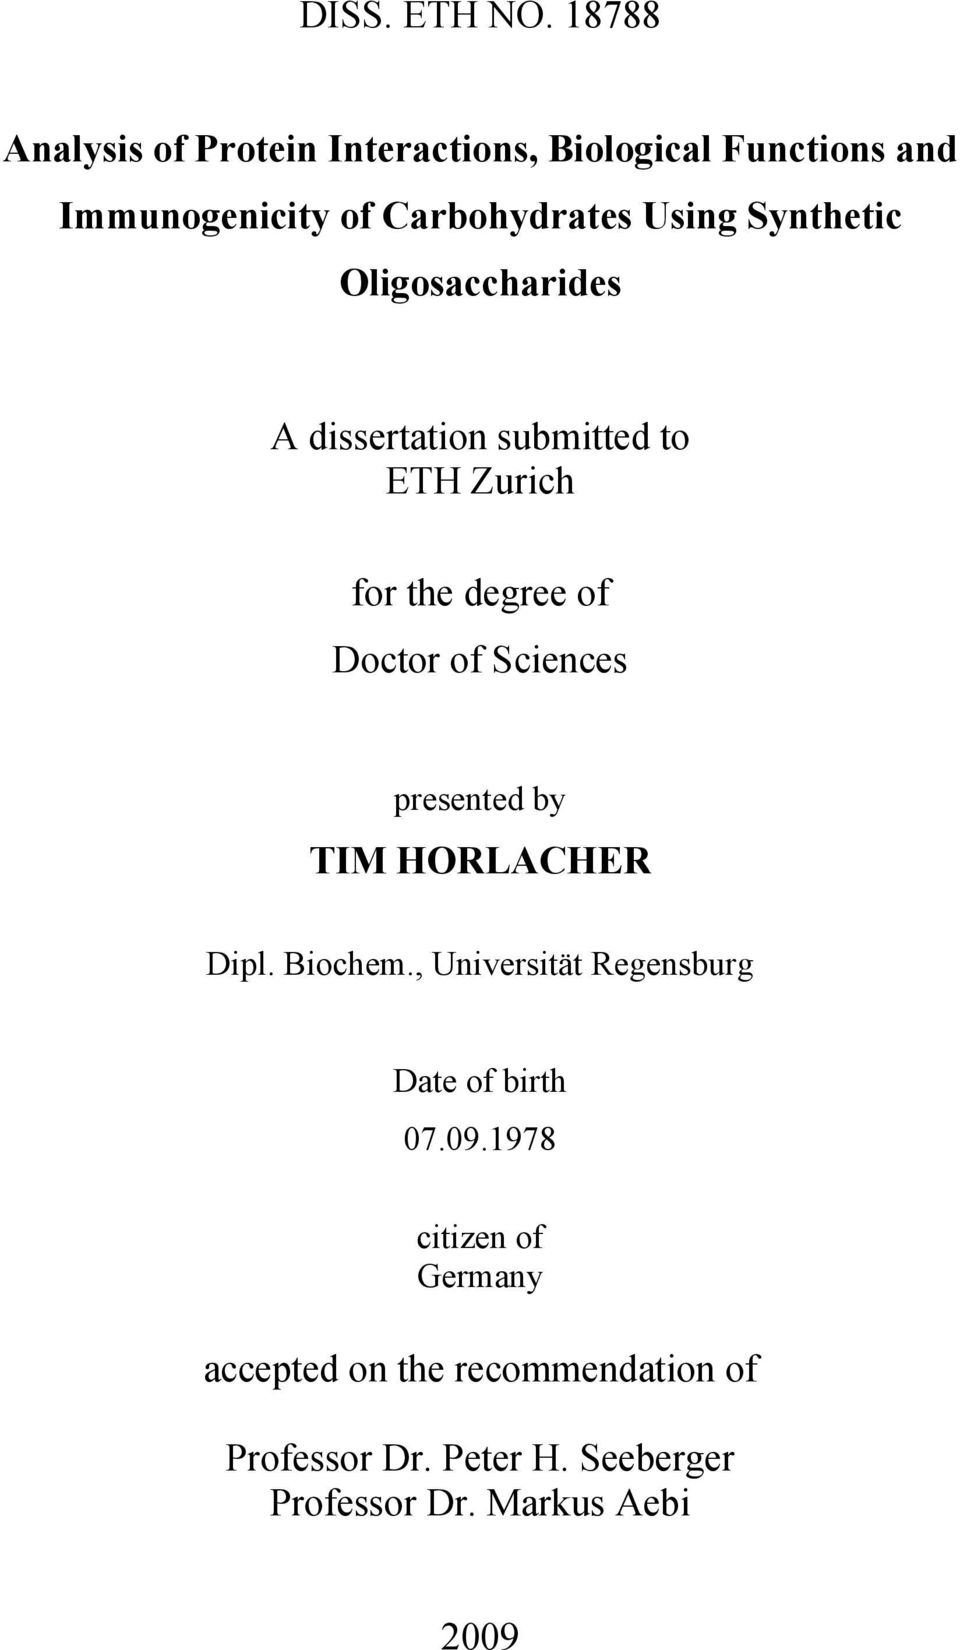 Synthetic Oligosaccharides A dissertation submitted to ETH Zurich for the degree of Doctor of Sciences